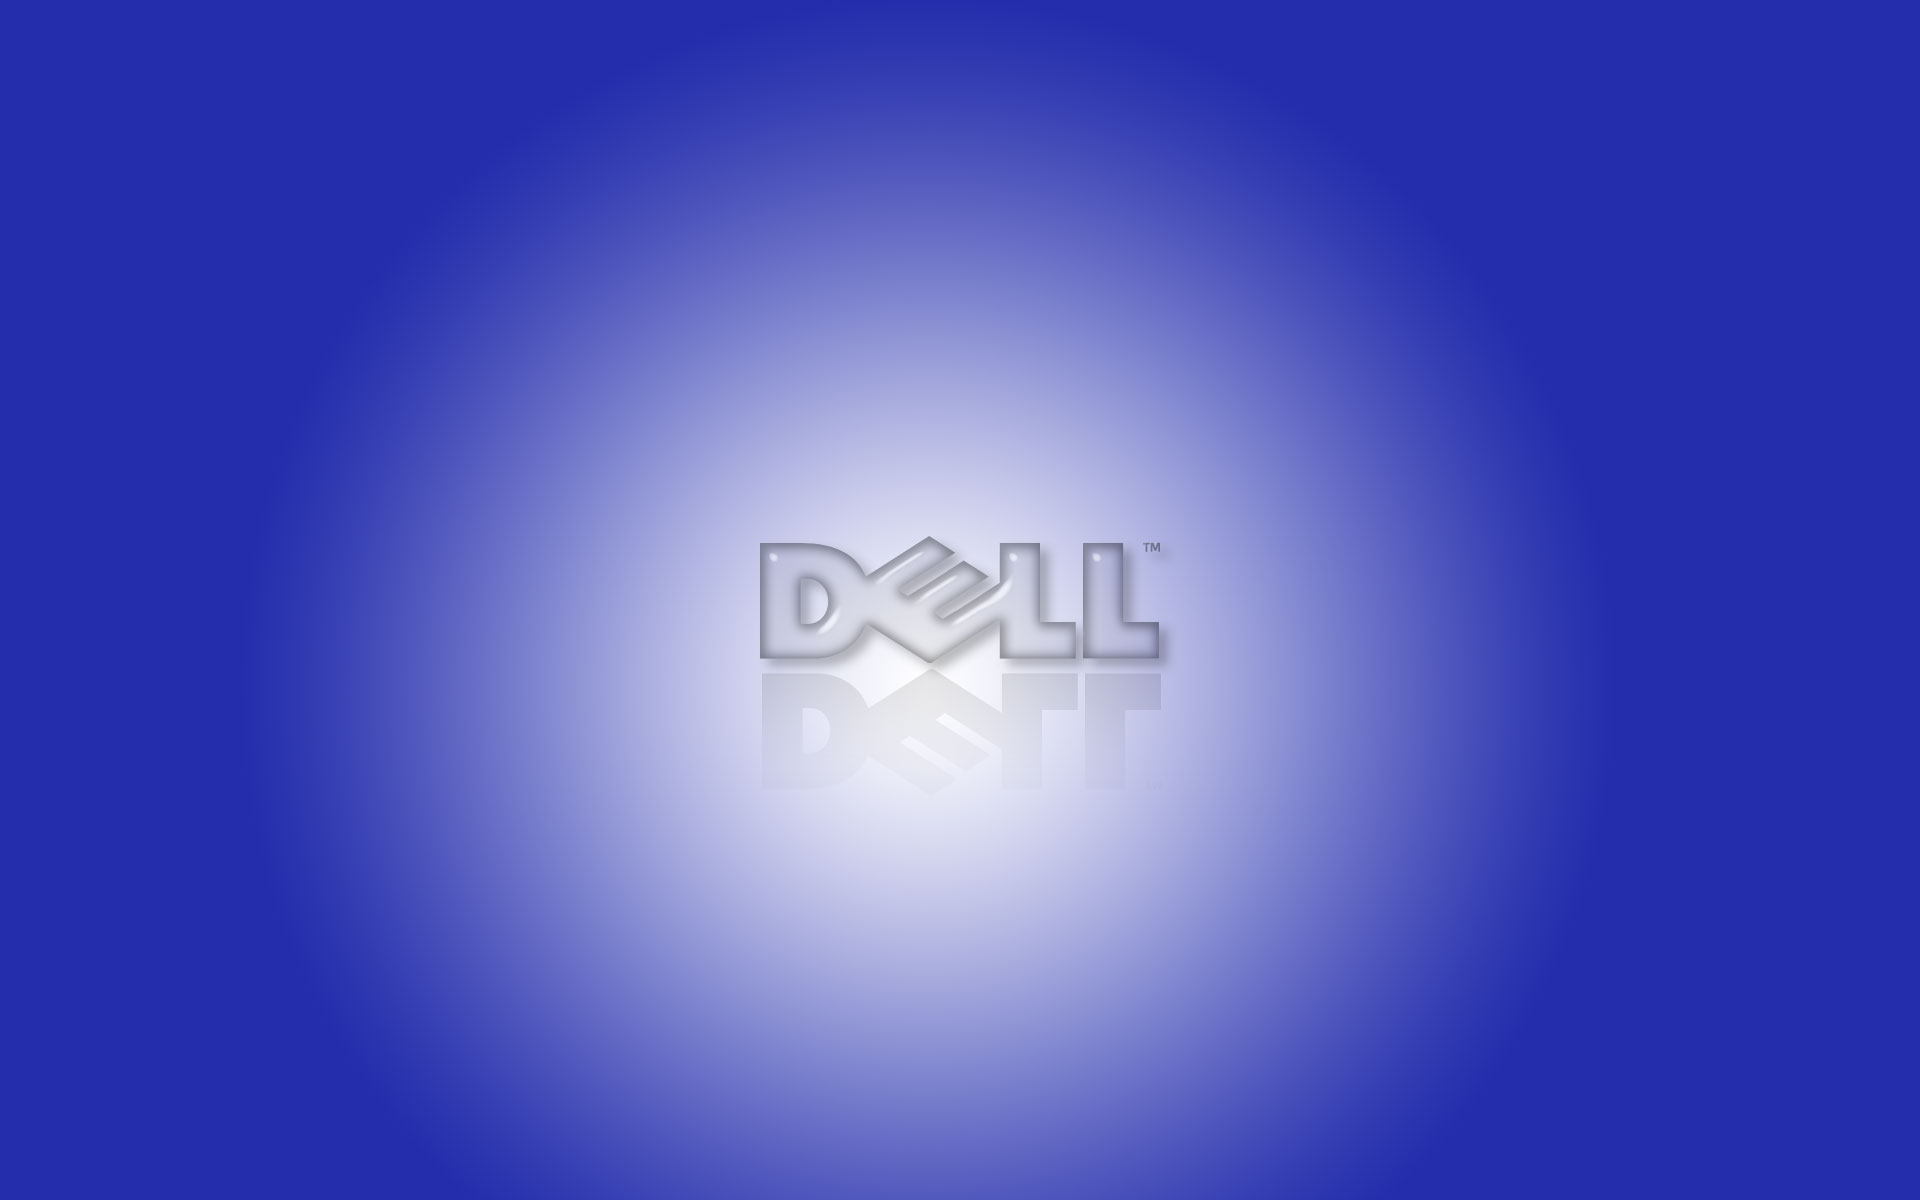 Dell Wallpaper Resolution S Image Size Pictures